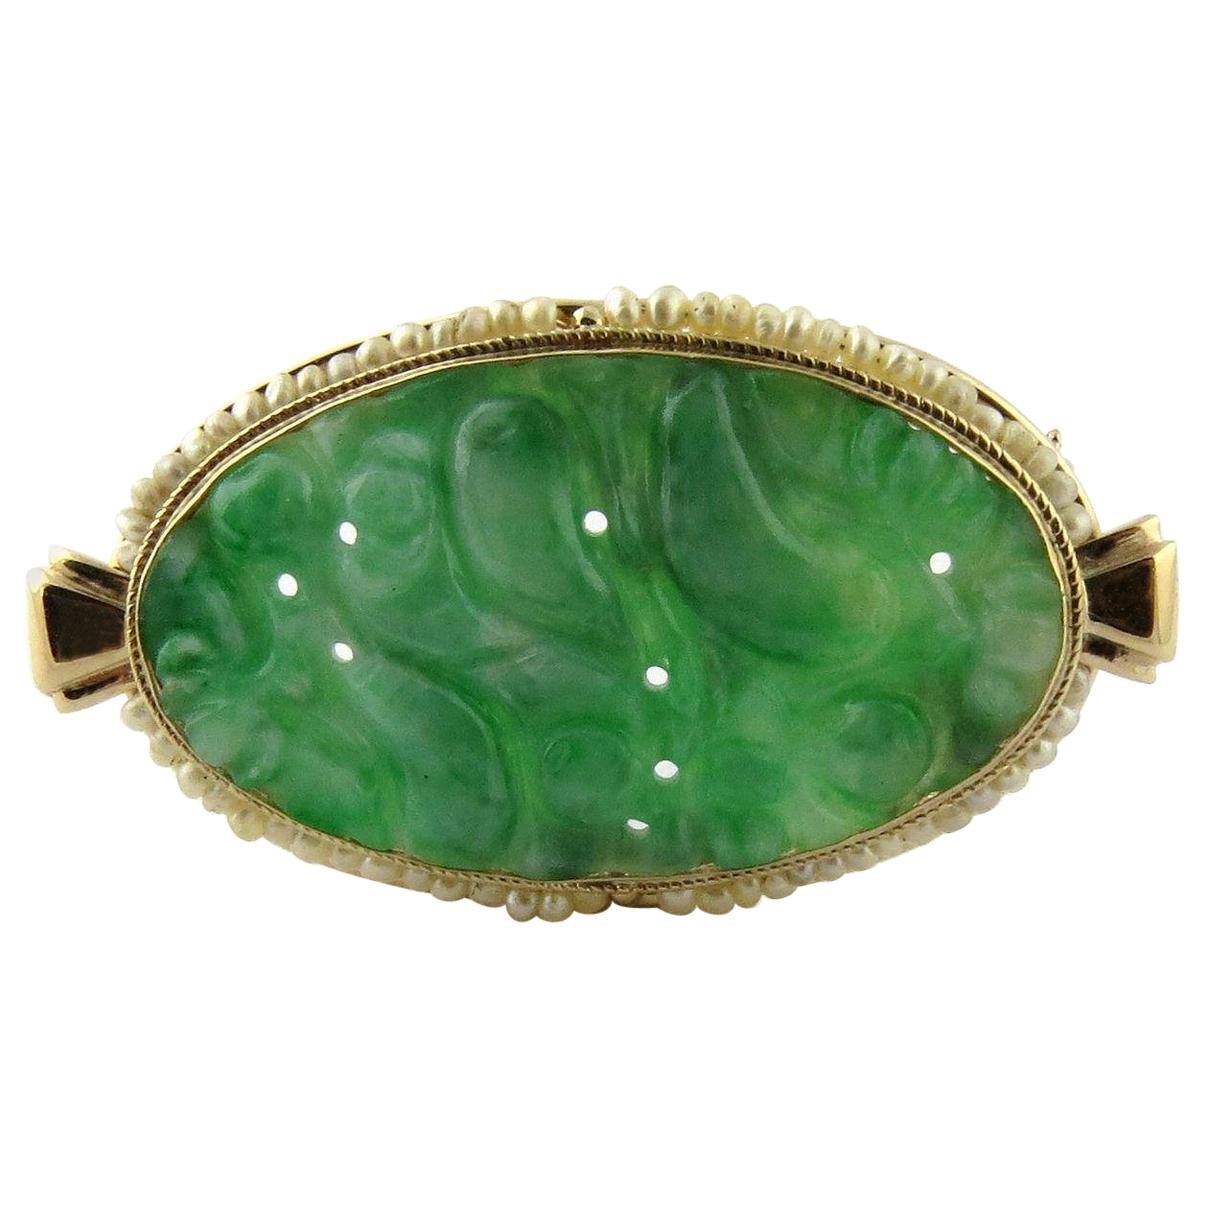 14 Karat Yellow Gold Oval Brooch Pin with Carved Jade and Seed Pearls